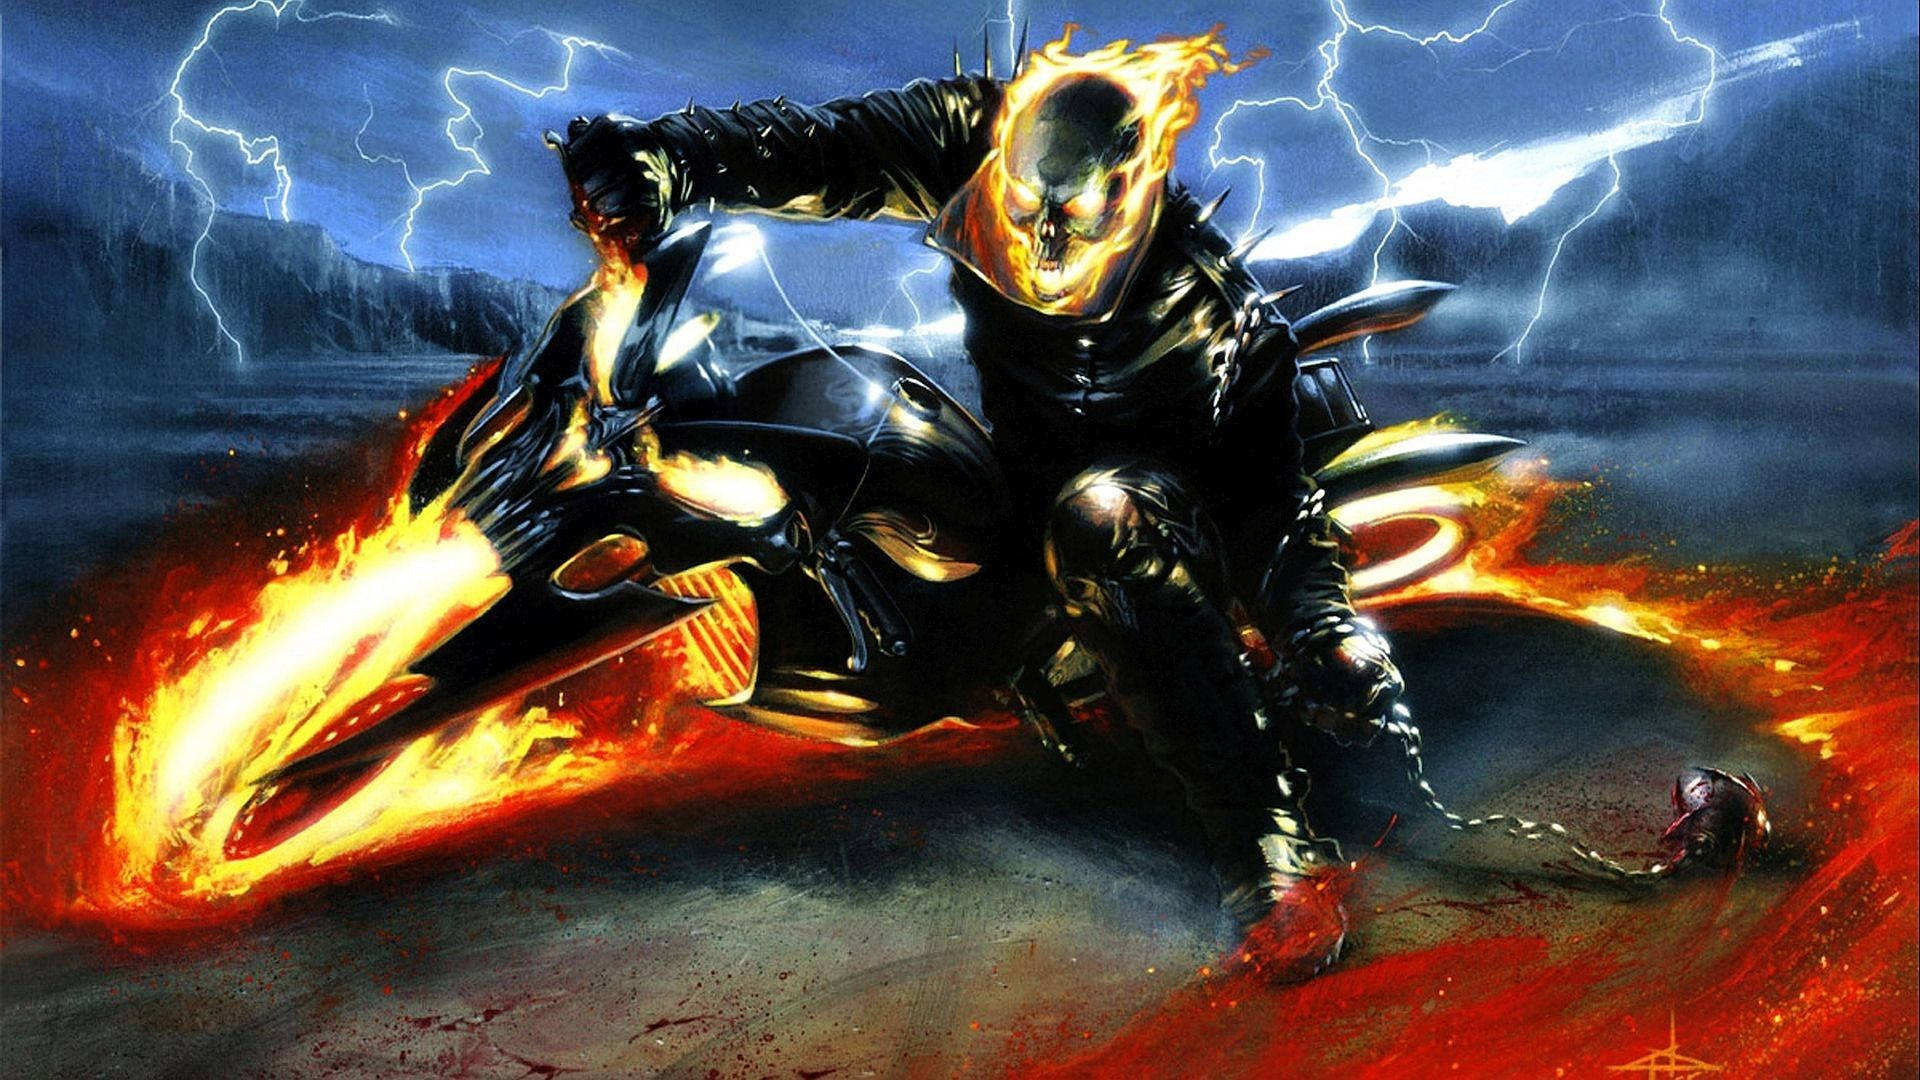 Free Ghost Rider Wallpaper Downloads, [100+] Ghost Rider Wallpapers for  FREE 